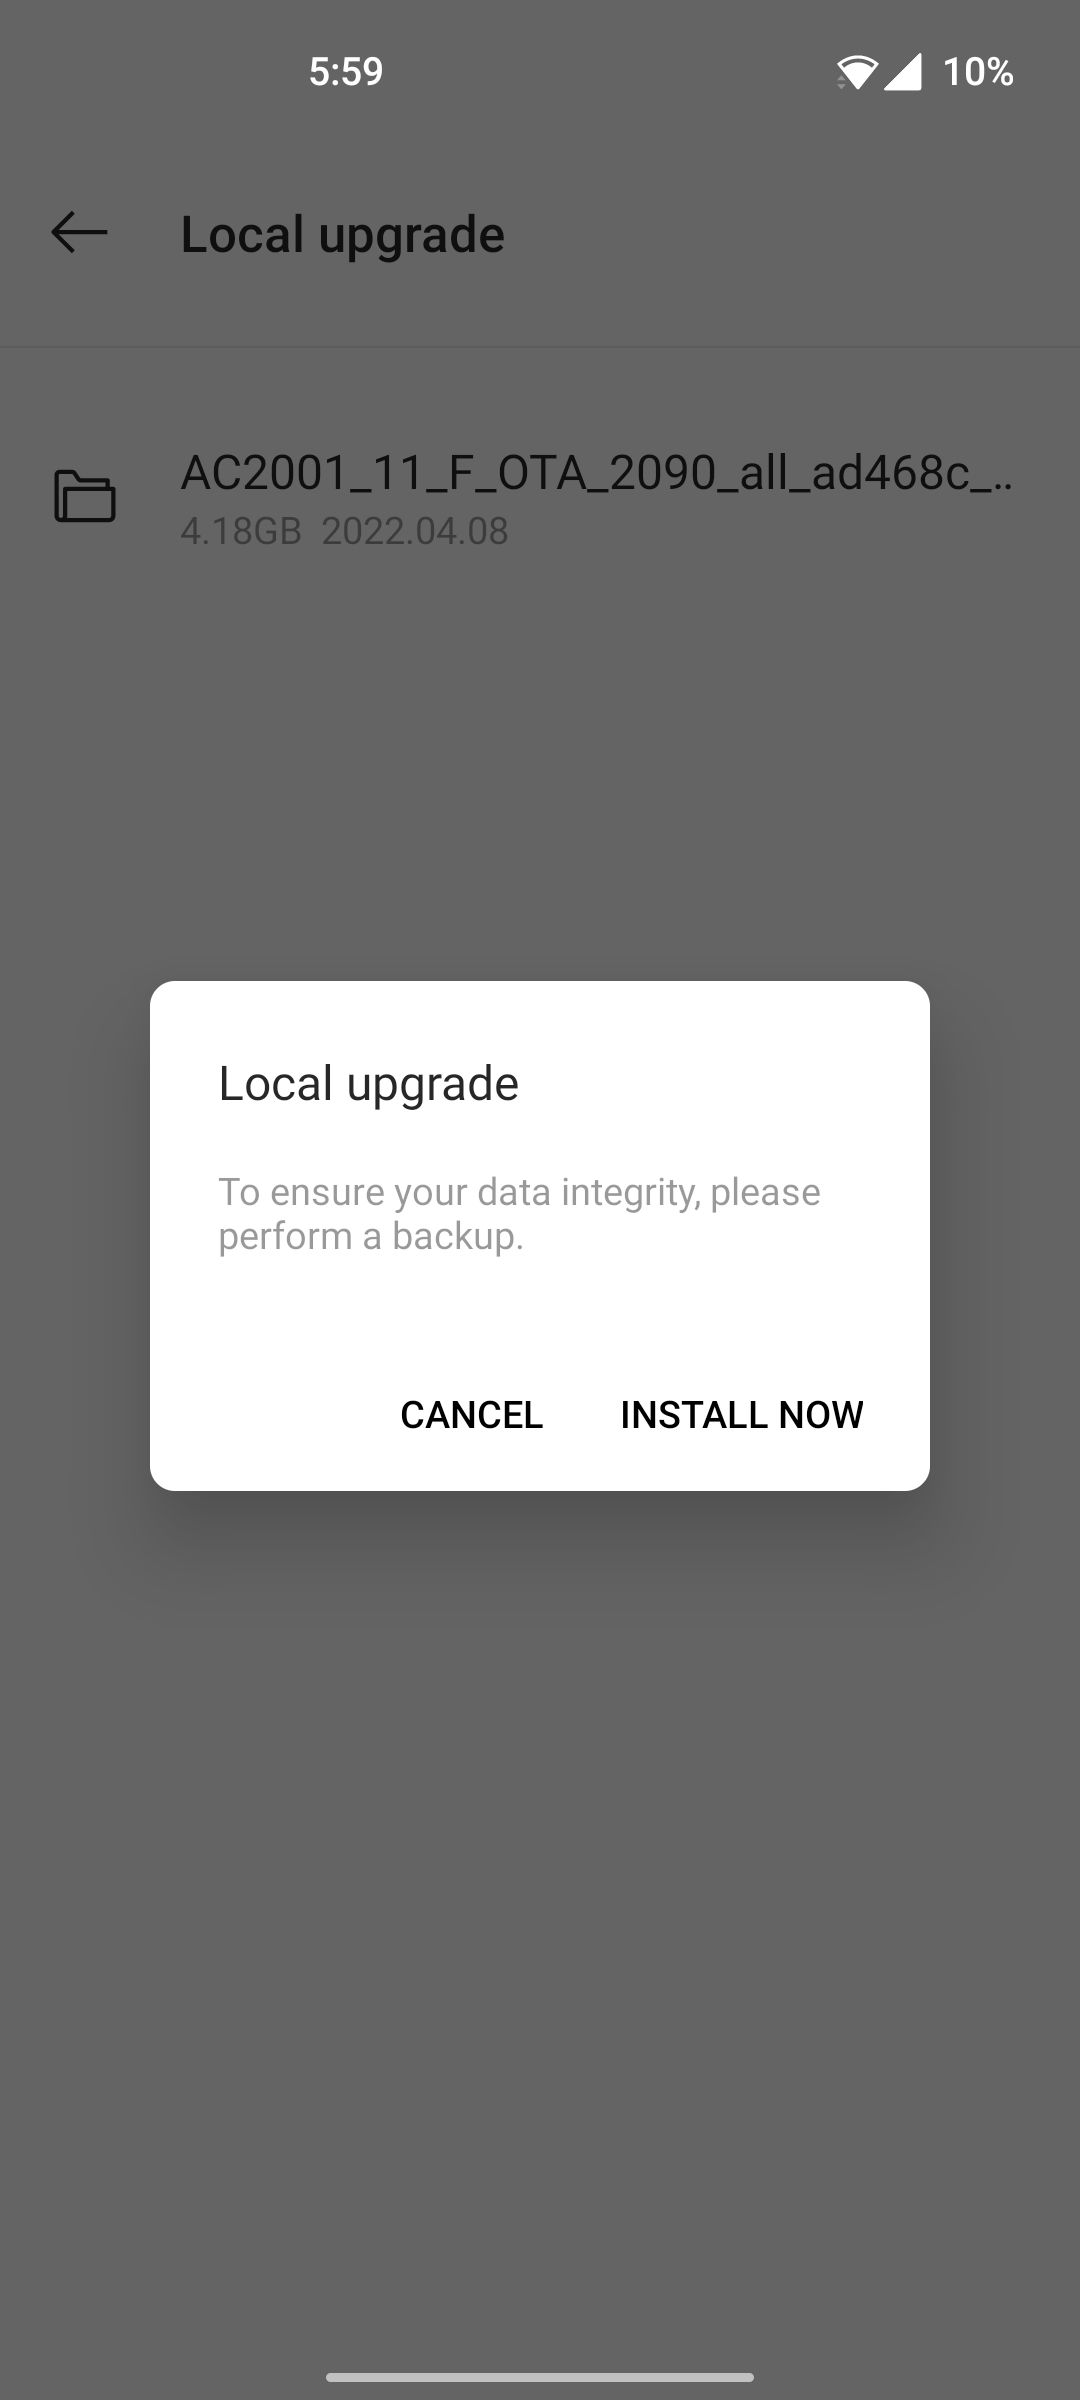 OxygenOS local upgrade confirmation screen